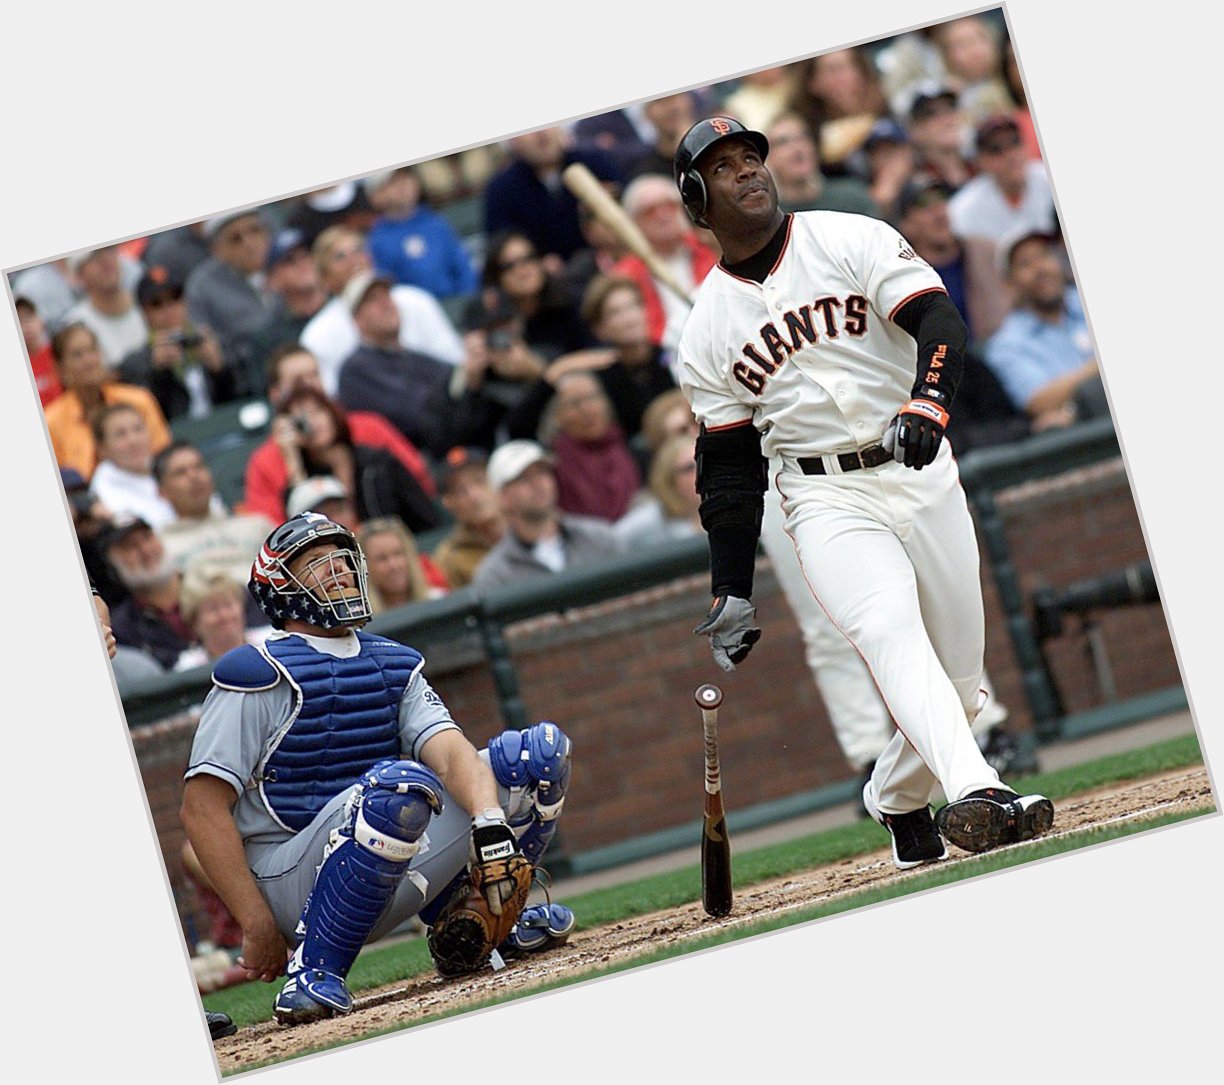 Happy birthday to a legend BARRY BONDS DESERVES TO BE IN THE HALL OF FAME 